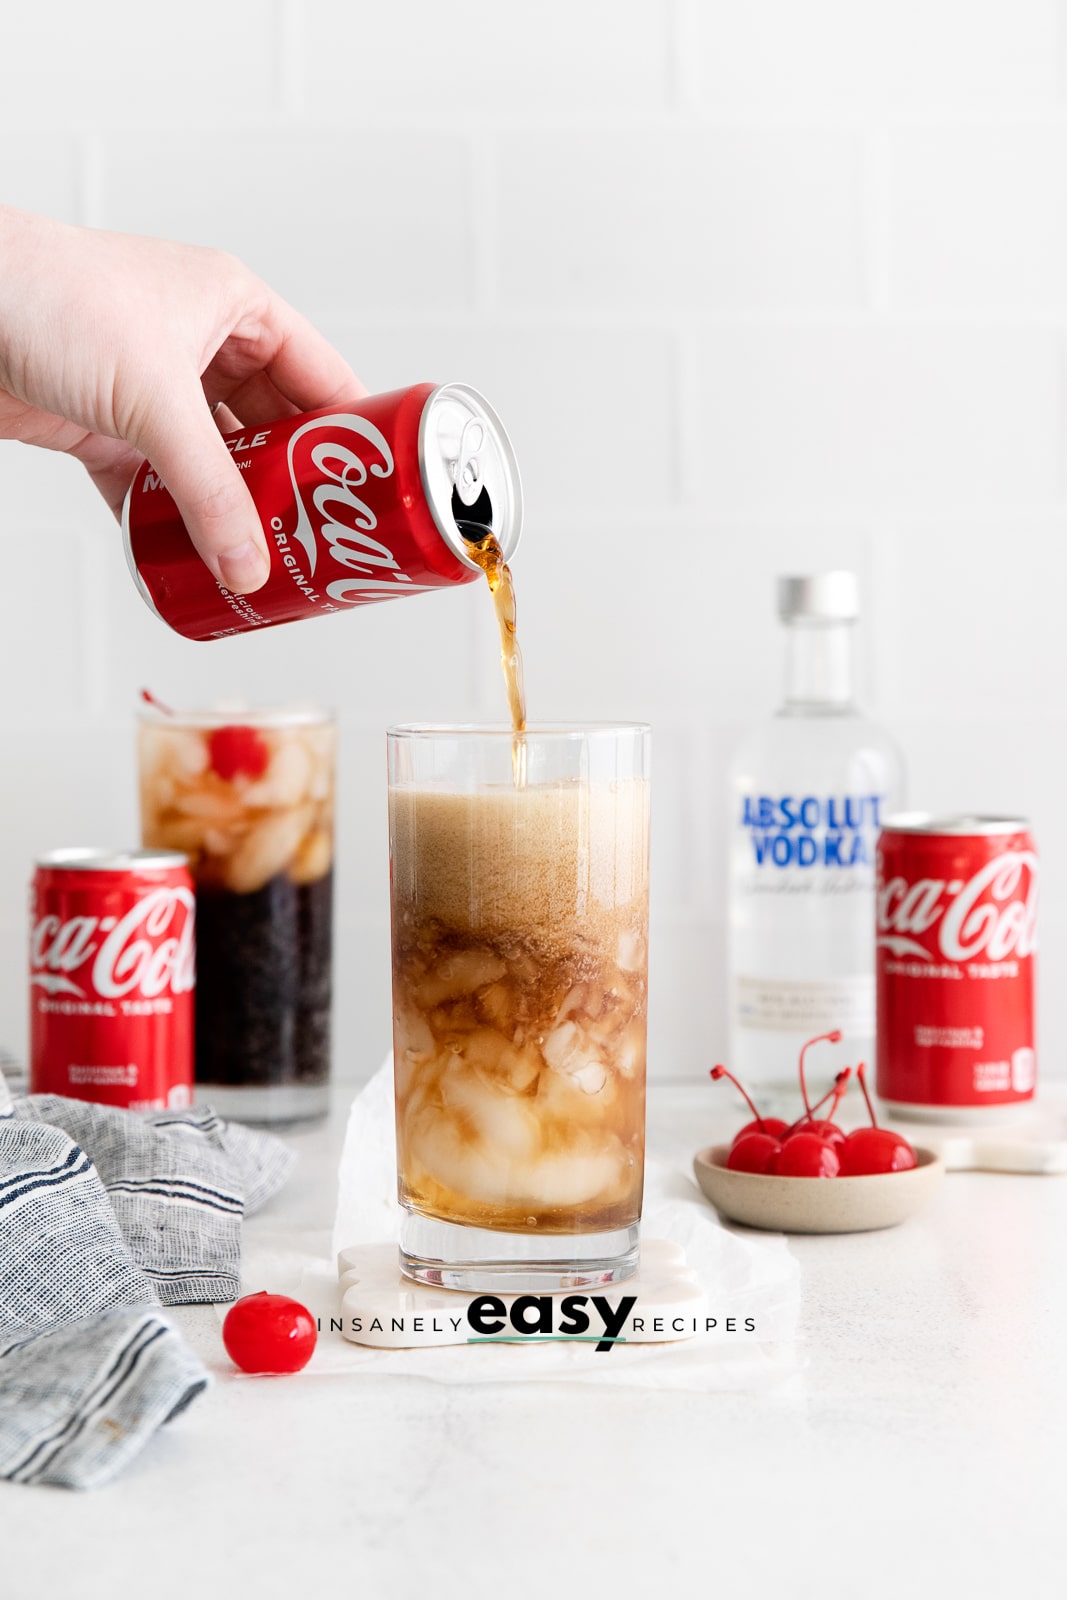 two tall glasses with brown liquid, ice cubes, cherry and straws. In background are two coke can and a vodka bottle. A cherry and bowl of cherries on table